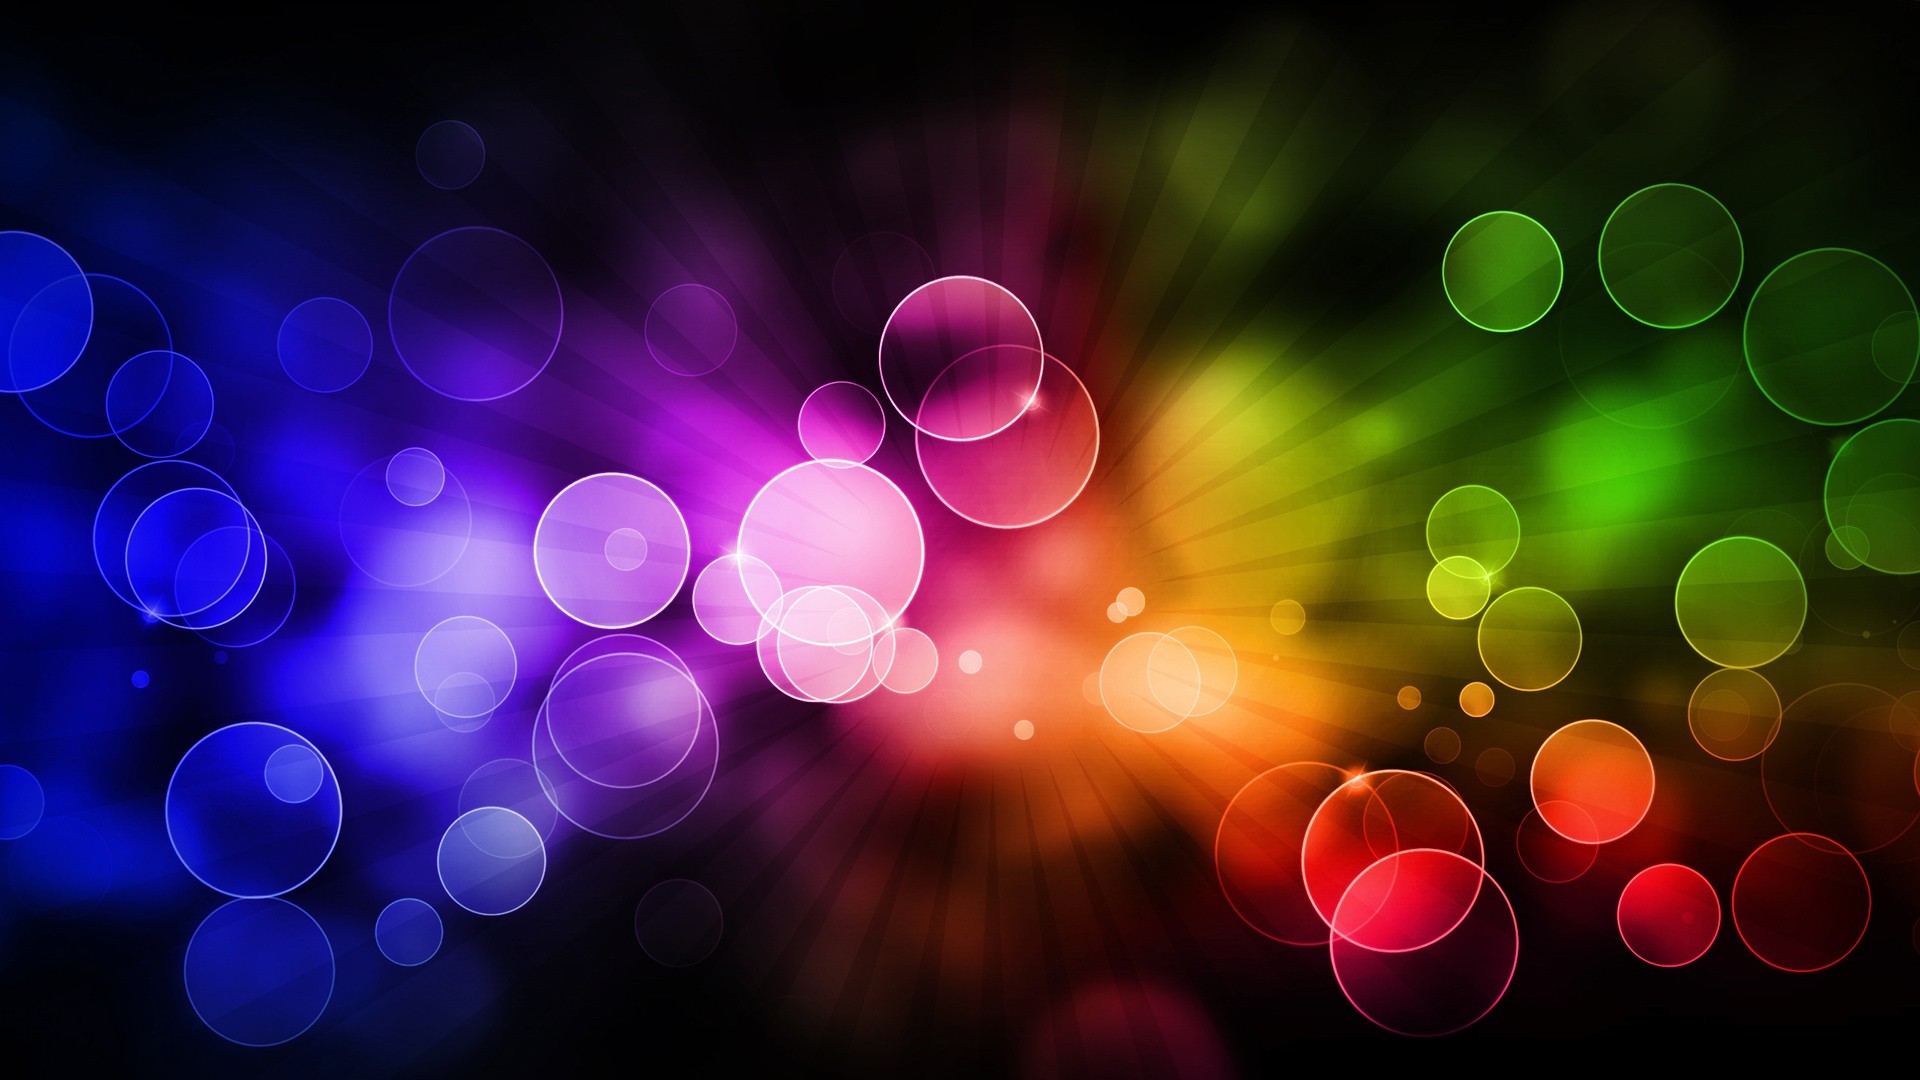 1920x1080 Wallpaper Rainbow Colors with image resolution  pixel. You can use  this wallpaper as background